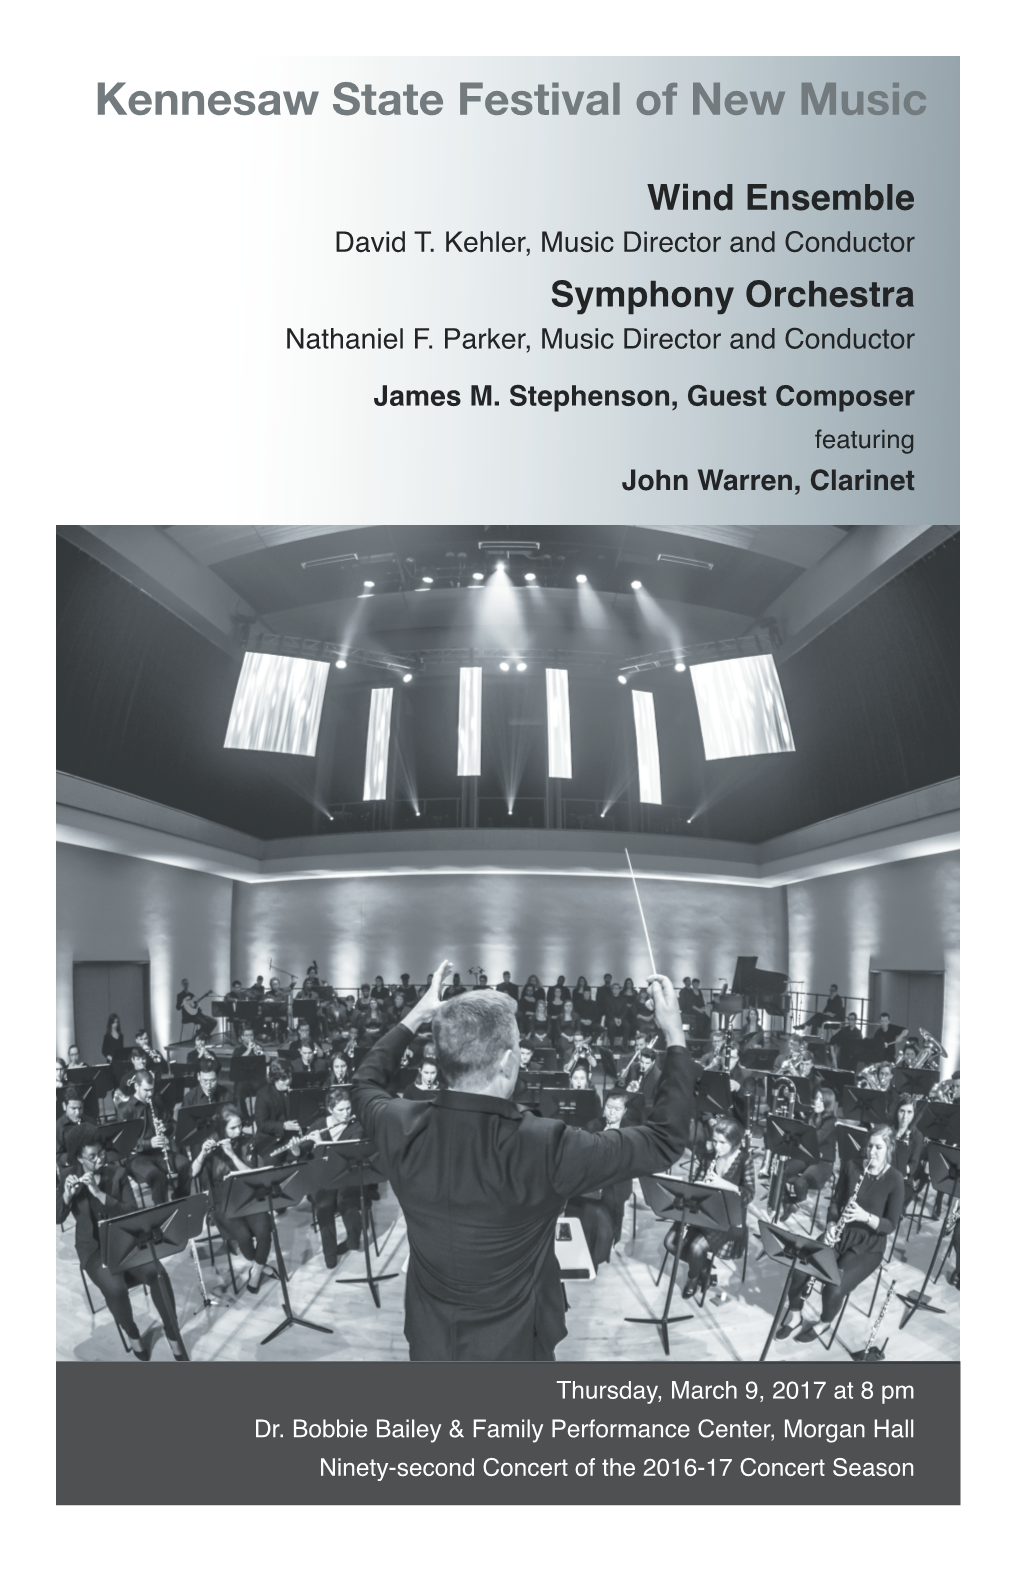 Wind Ensemble and Symphony Orchestra